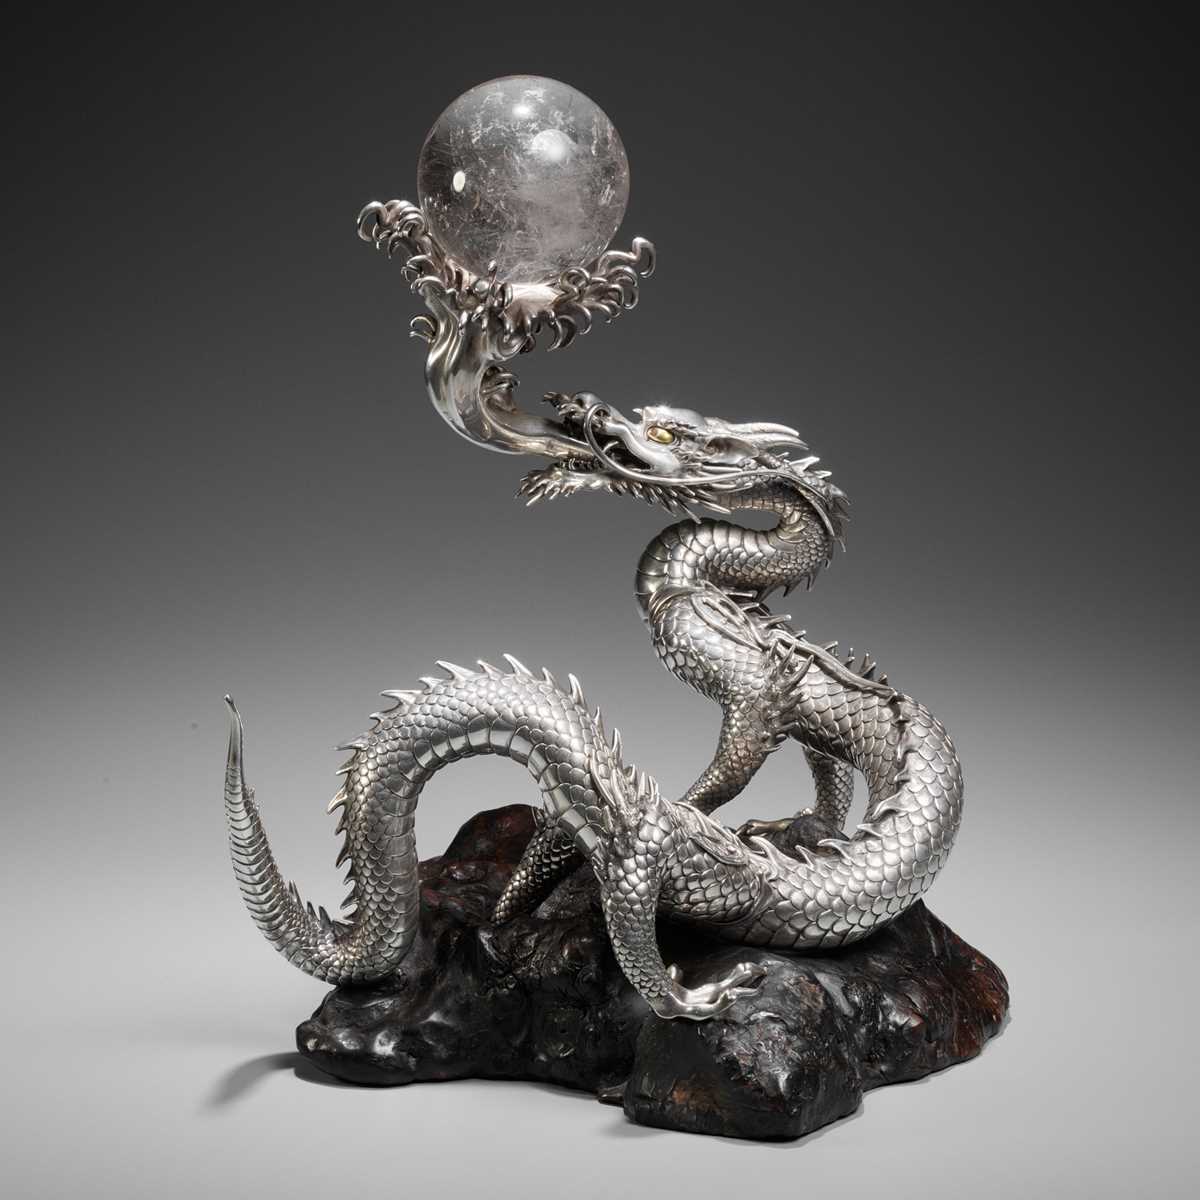 Lot 54 - SANMI: A MASTERFUL SILVER OKIMONO OF A DRAGON WITH ROCK CRYSTAL SPHERE